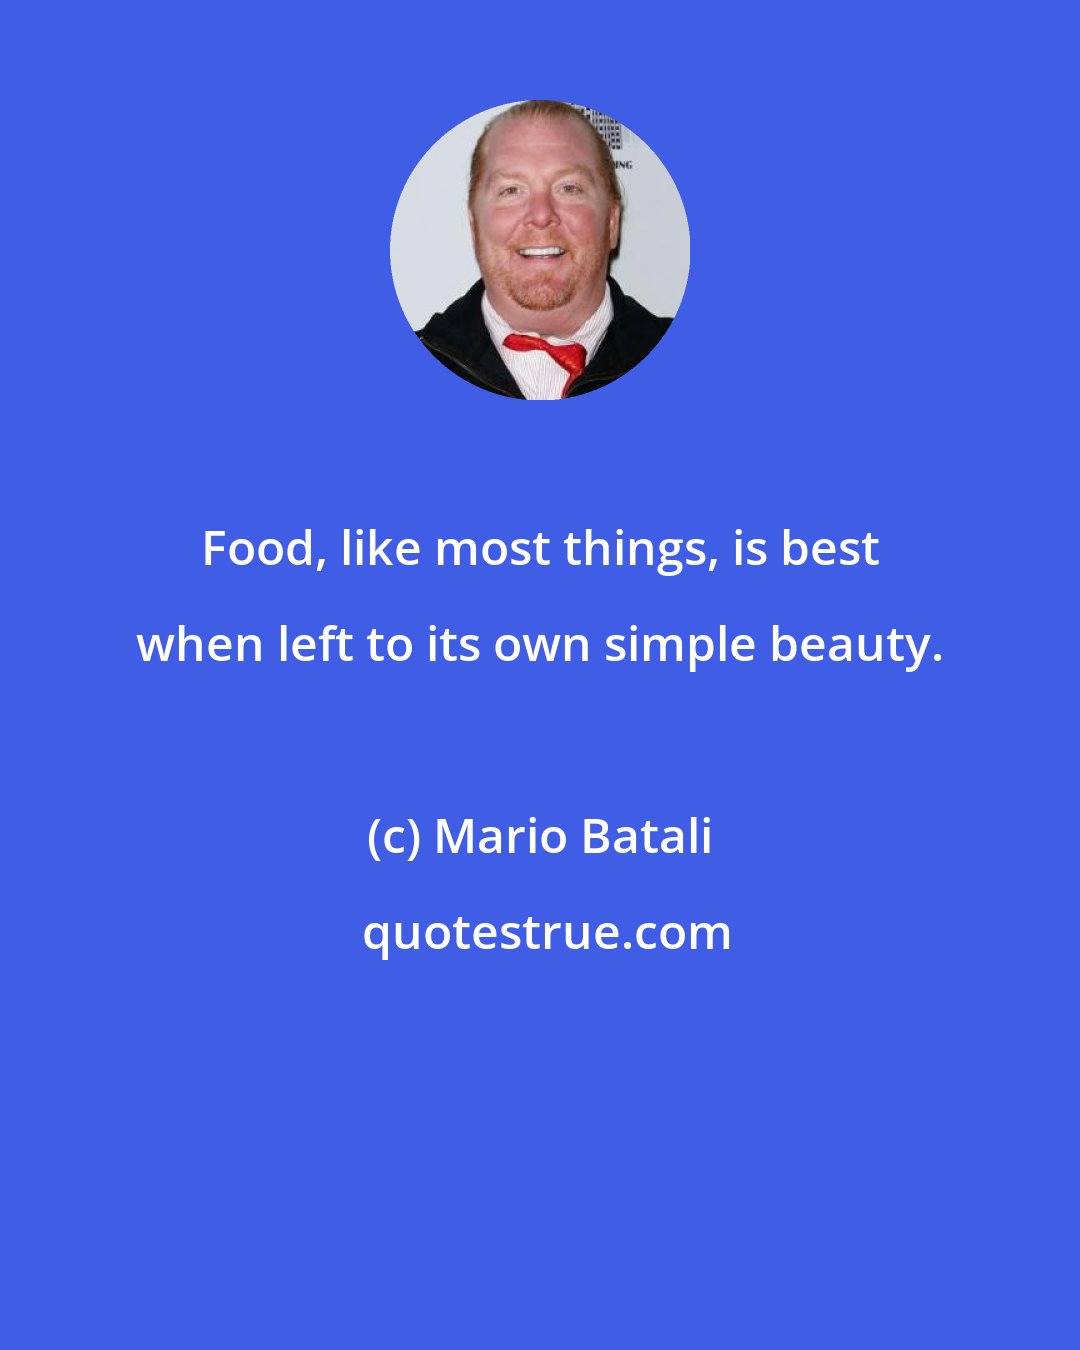 Mario Batali: Food, like most things, is best when left to its own simple beauty.